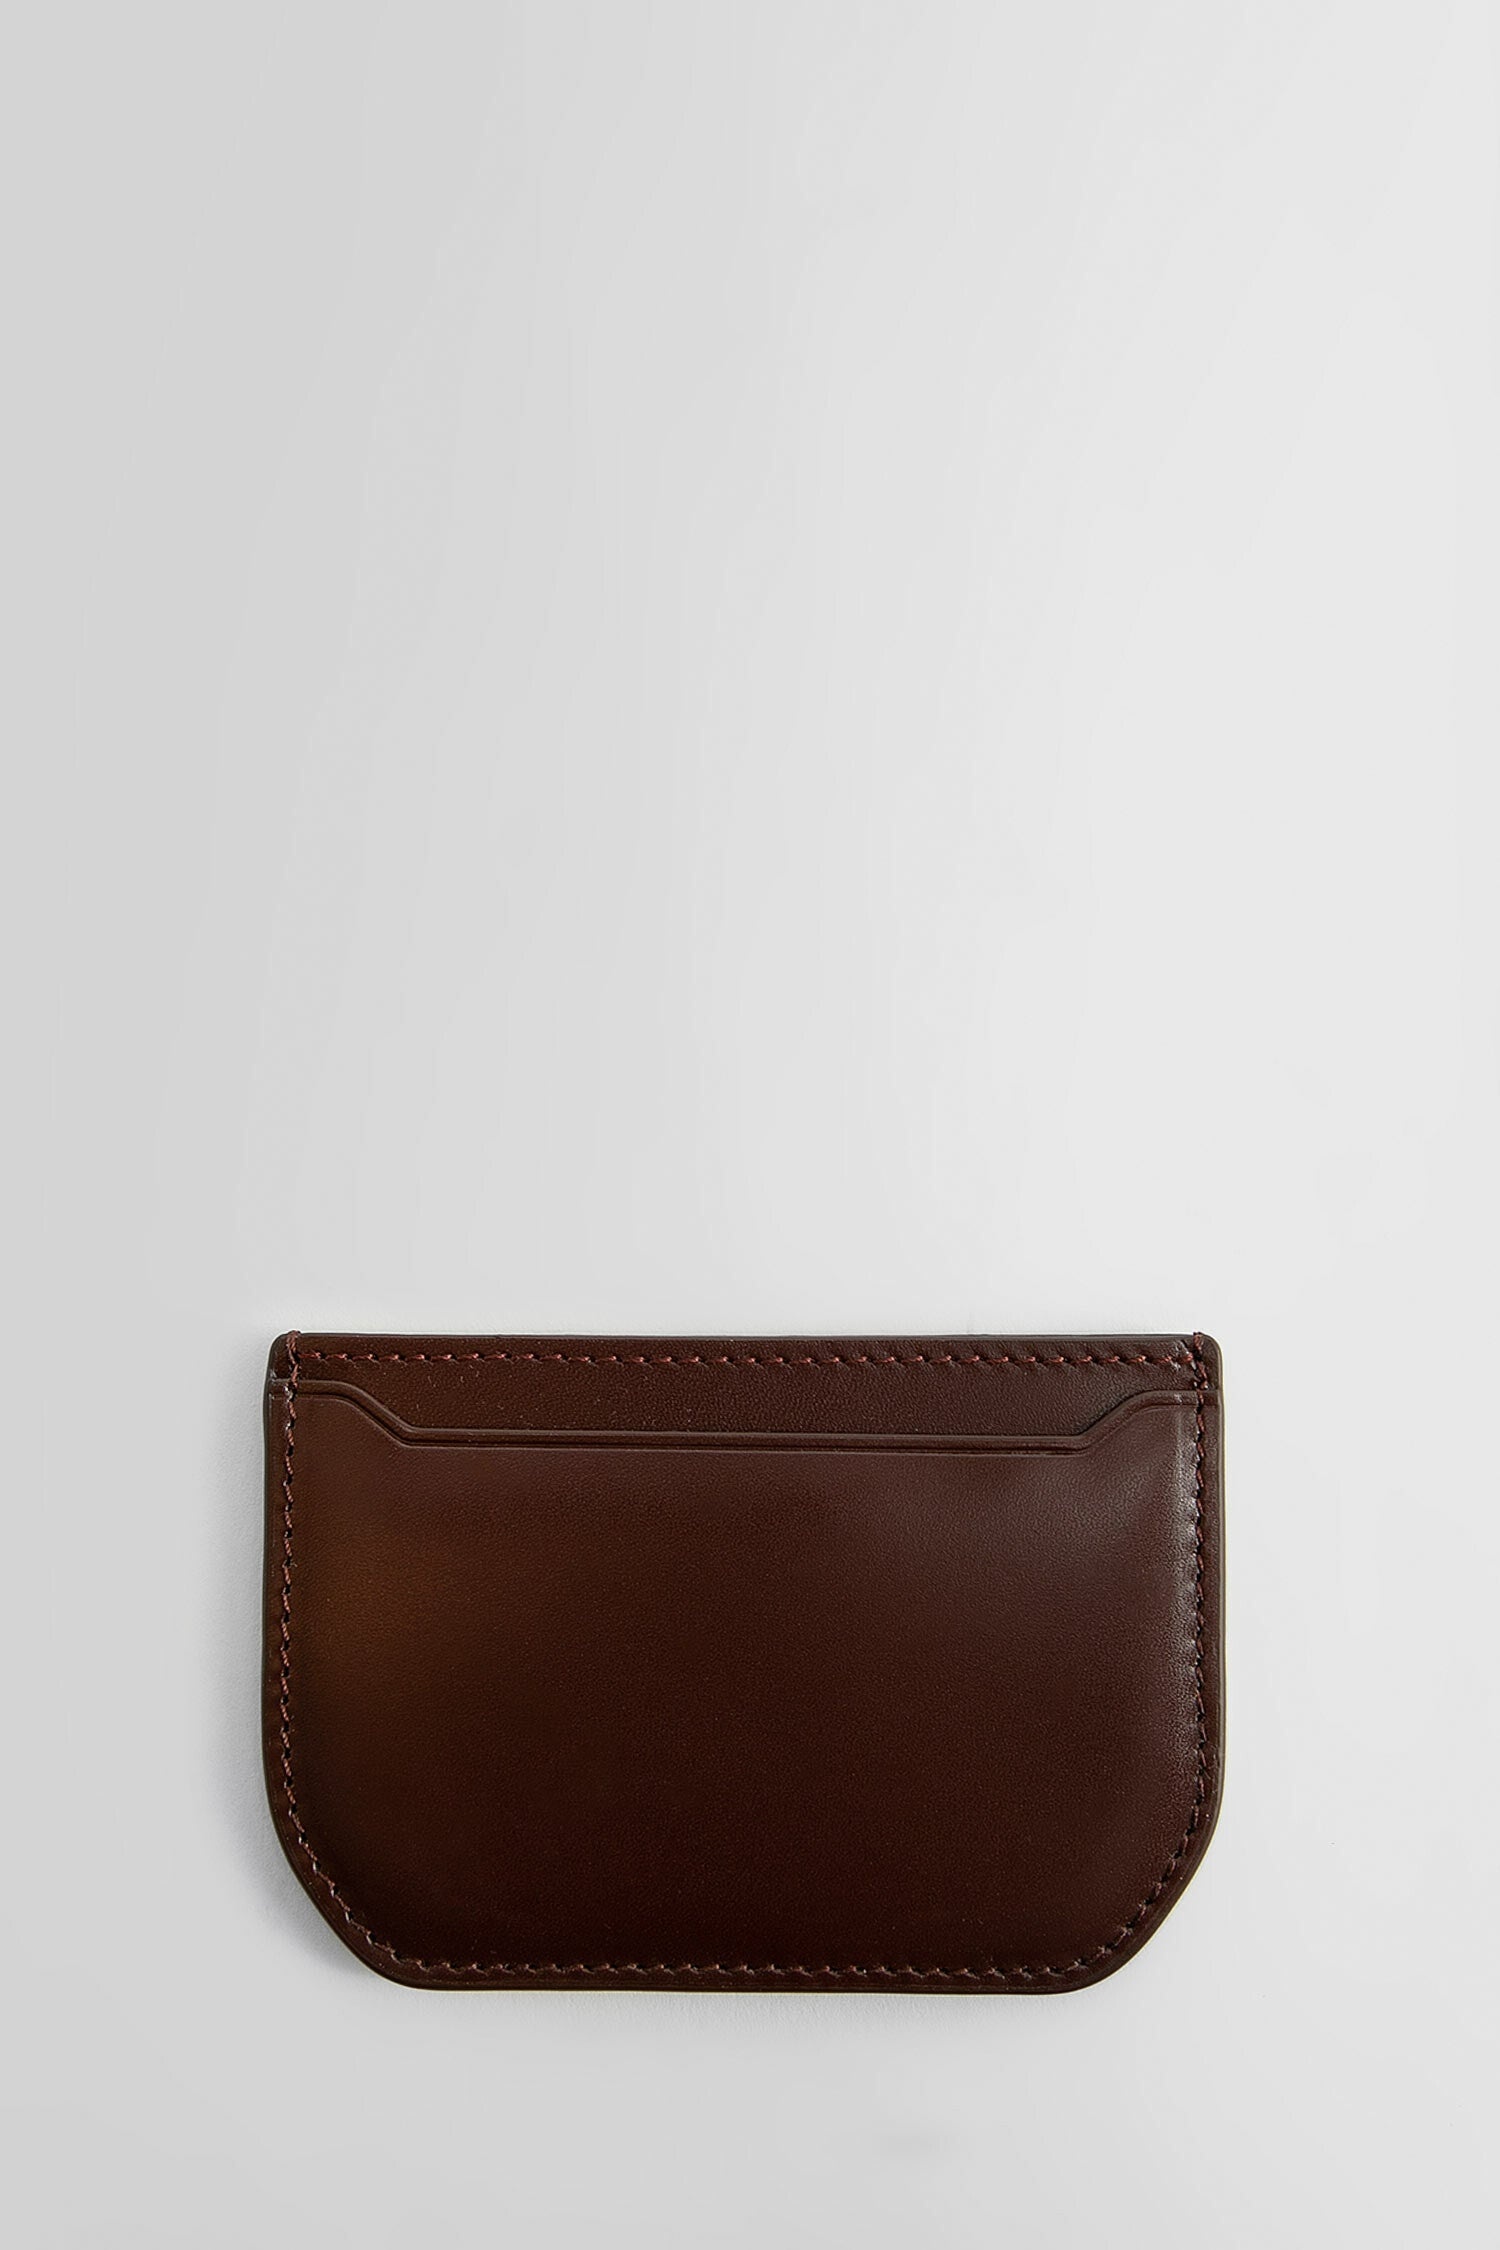 LEMAIRE UNISEX BROWN WALLETS & CARDHOLDERS - 1